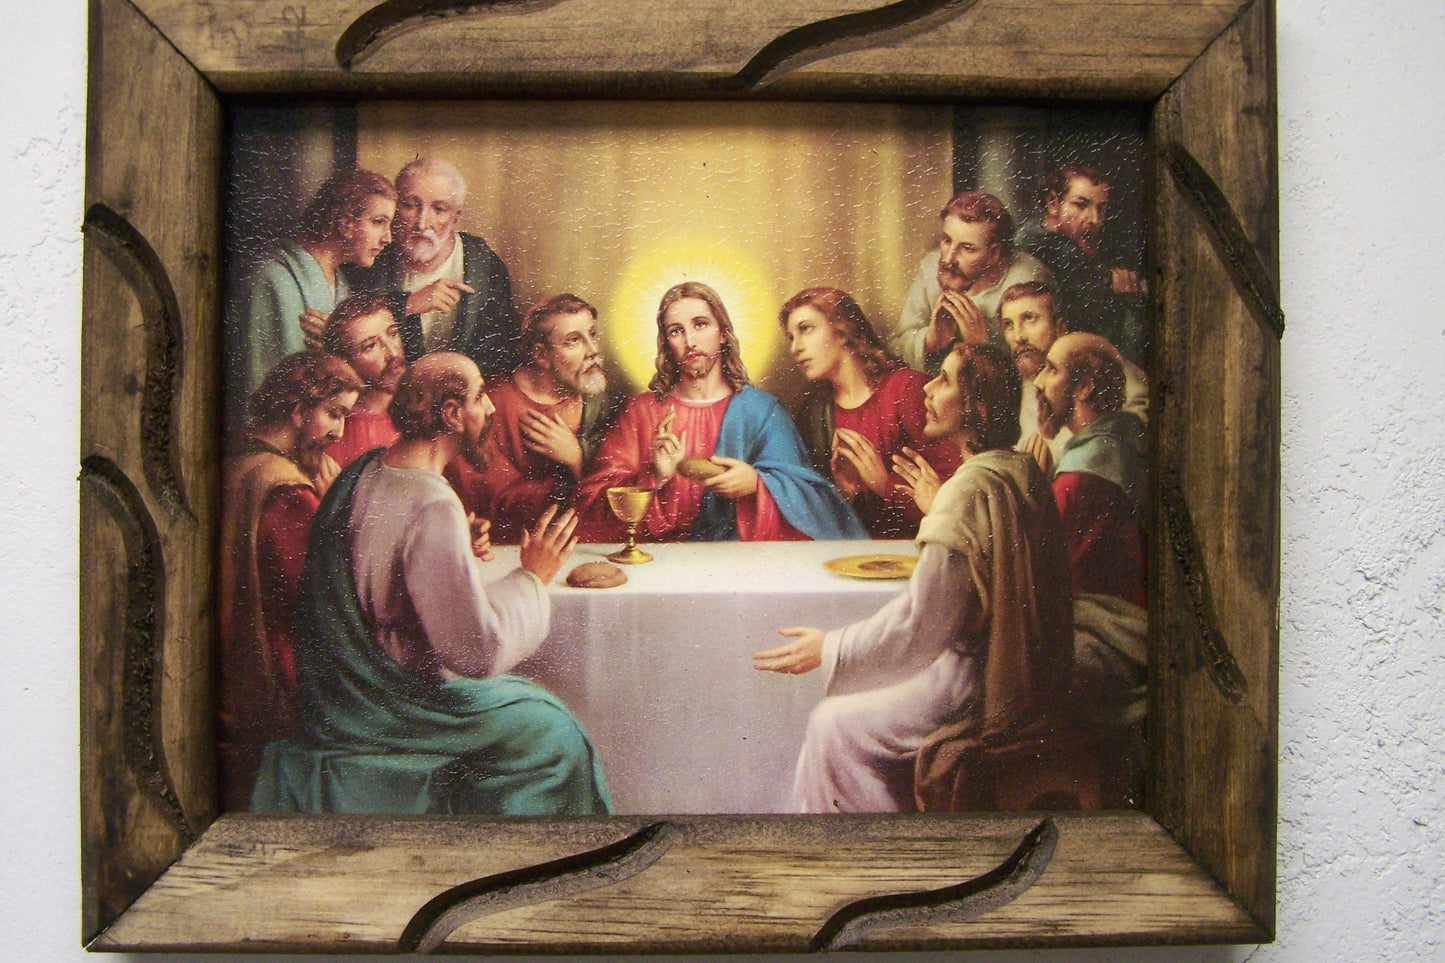 12" x 9.5" Framed Giclee Print - Last Supper, Type 2 - Mexico